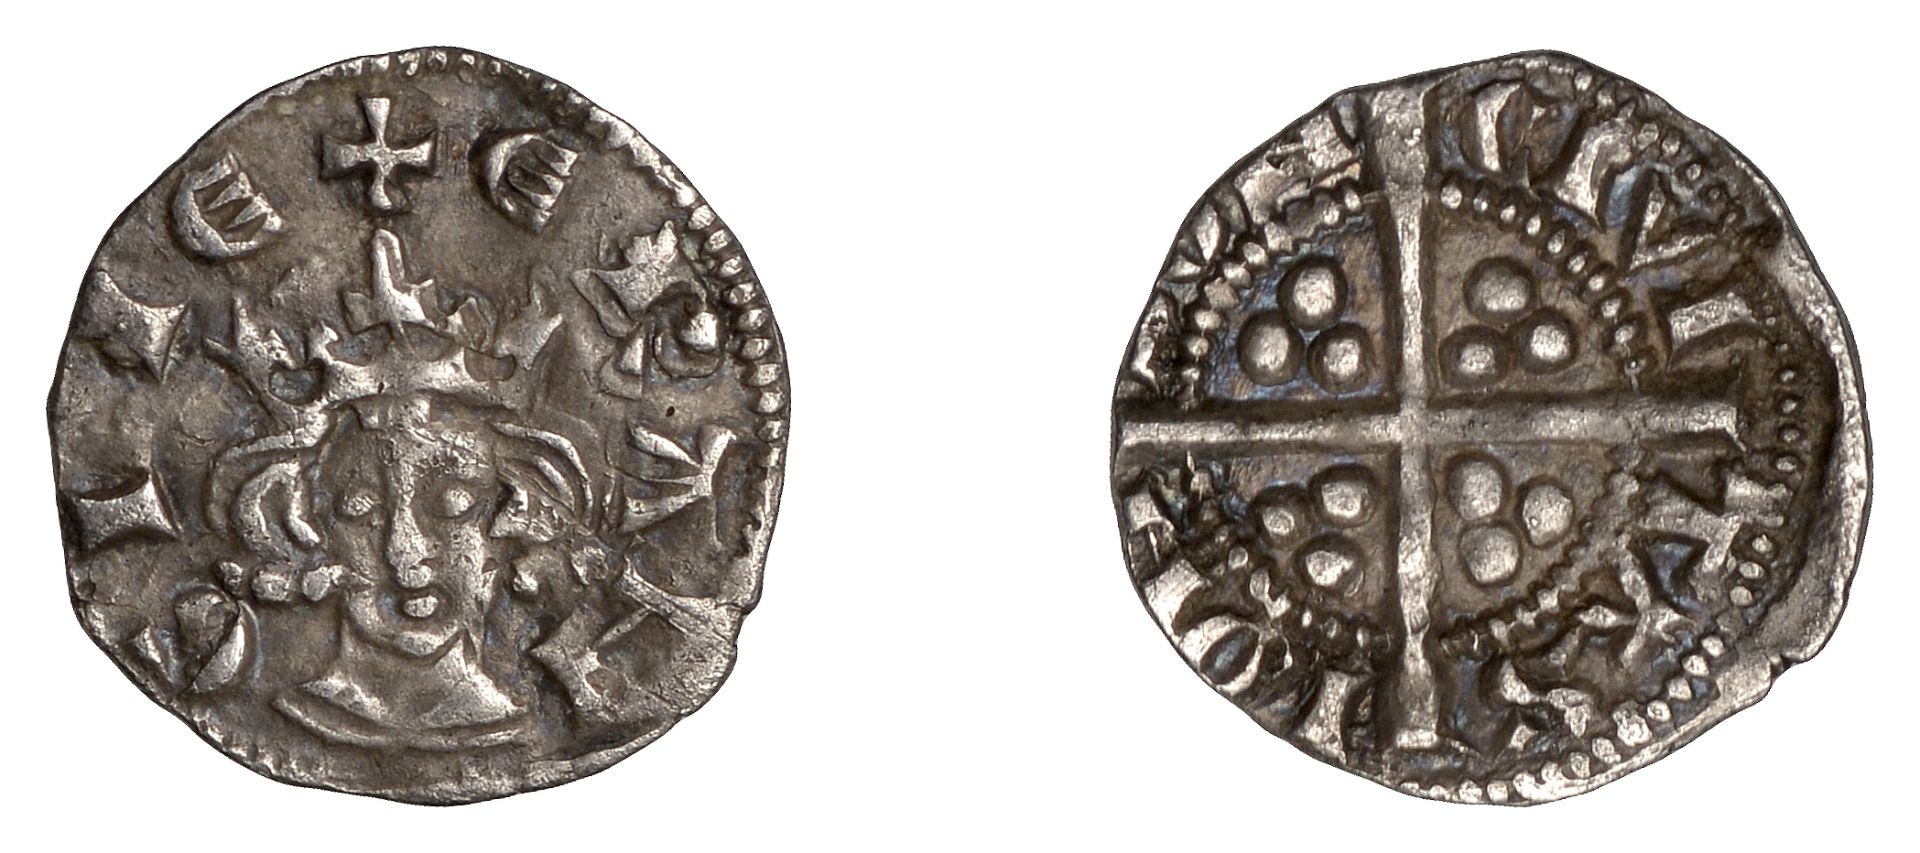 Edward I (1272-1307), Farthing, class 4de, 0.37g/3h (Withers 14; N 1054/1; S 1446A). Good ve...